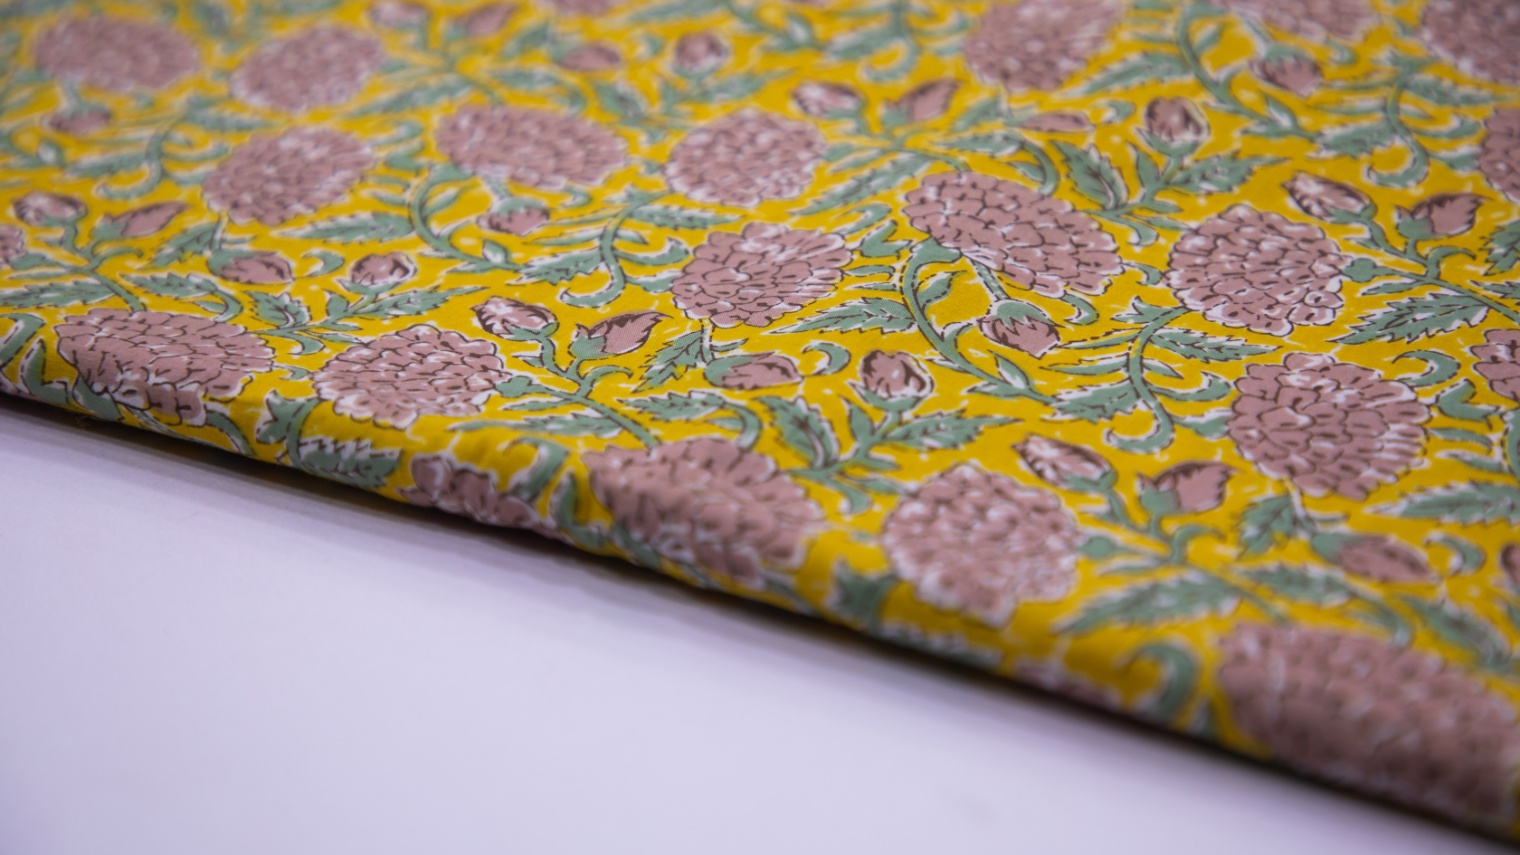 CANARY YELLOW COLOR COTTON SCREEN PRINT JAIPURI FLORAL JAAL PATTERN FABRIC - 5711